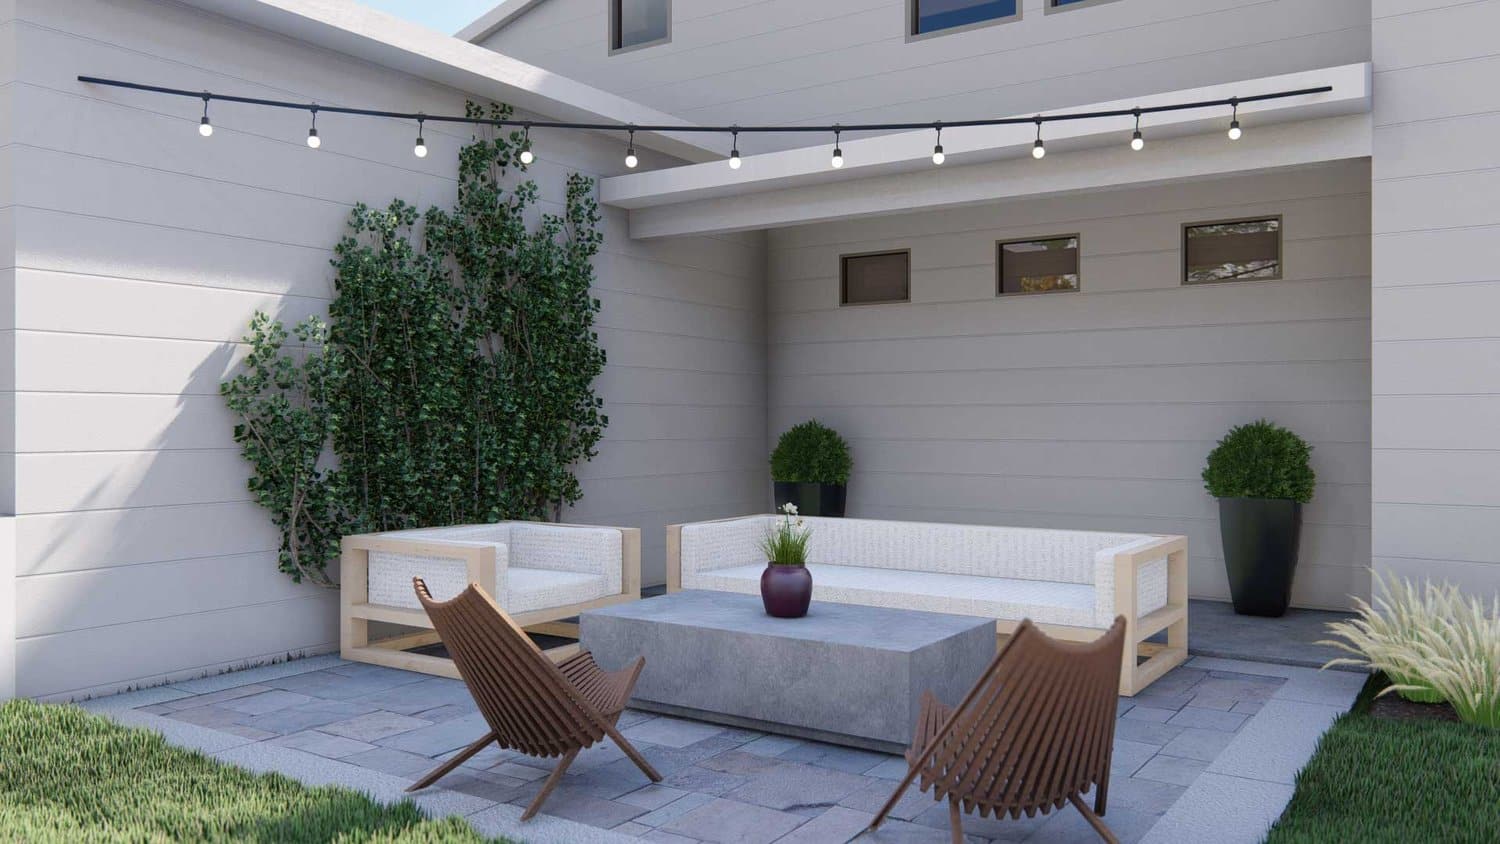 Twin Falls backyard showing string lights over concrete paver patio seating area with plants